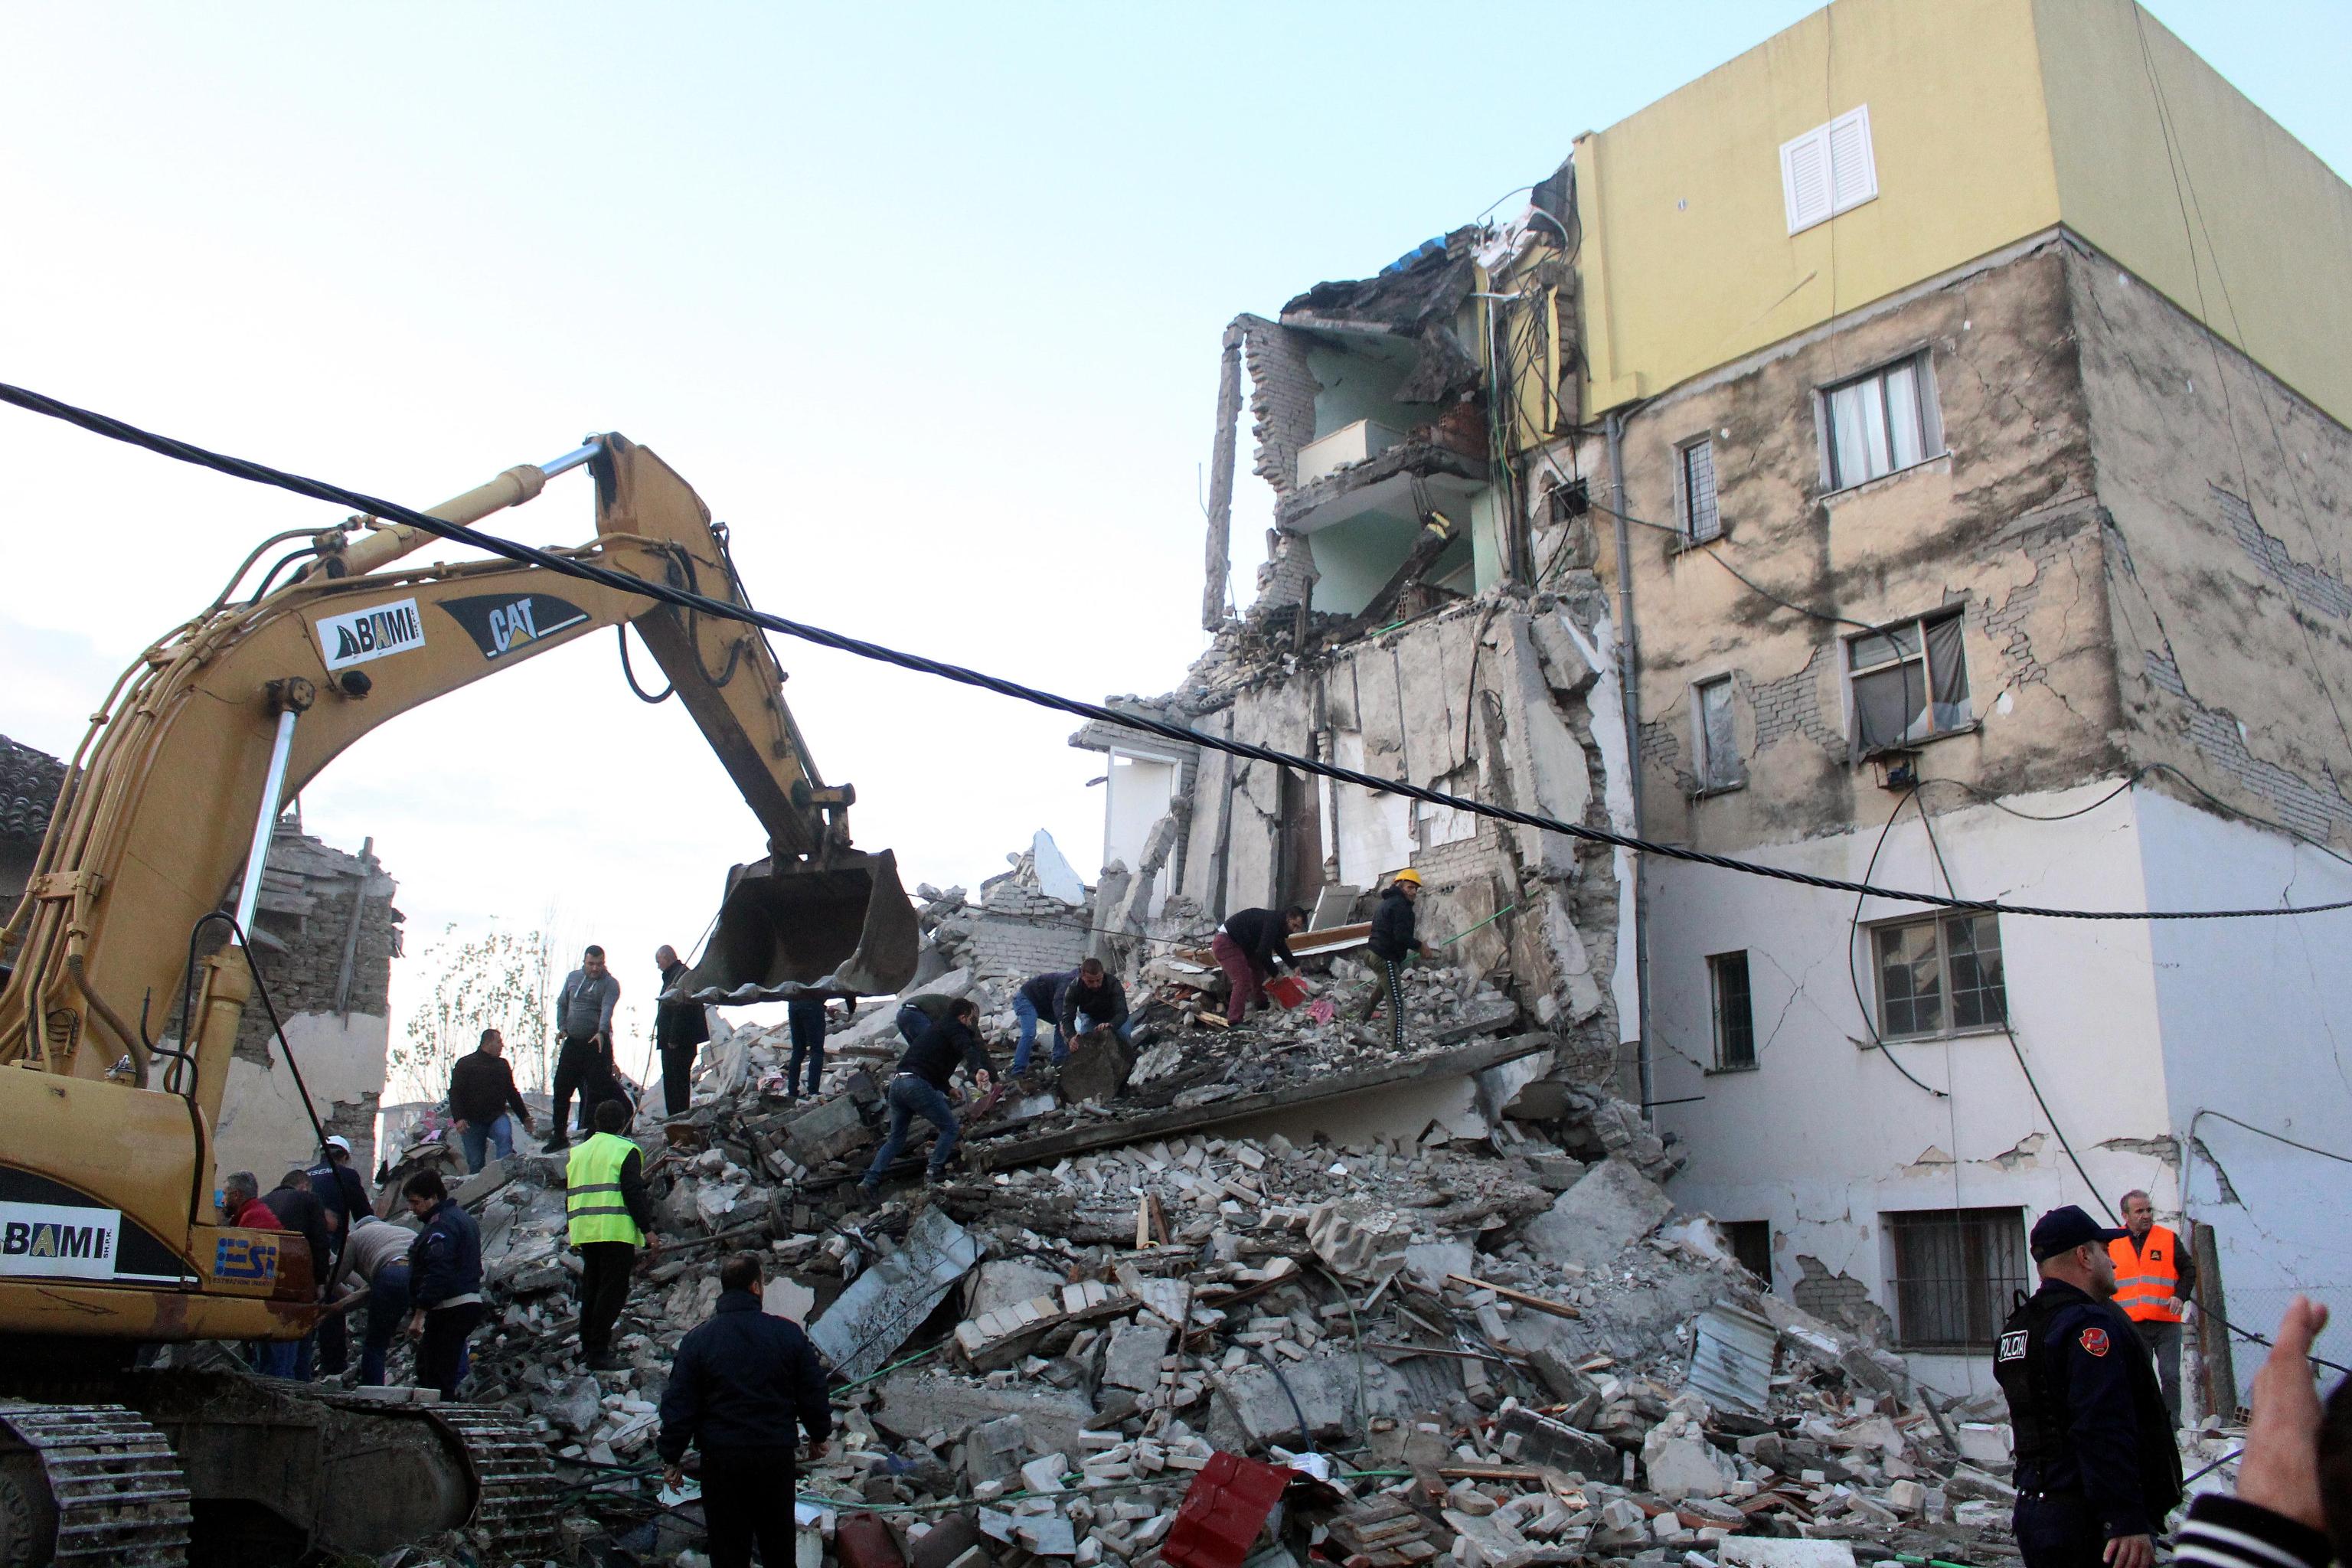 epa08025883 People search for survivors in the rubble of a building after an earthquake hit Thumane, Albania, 25 November 2019. Albania was hit by a 6.4 magnitude earthquake on 26 November 2019, leaving three people dead and dozens injured.  EPA/MALTON DIBRA